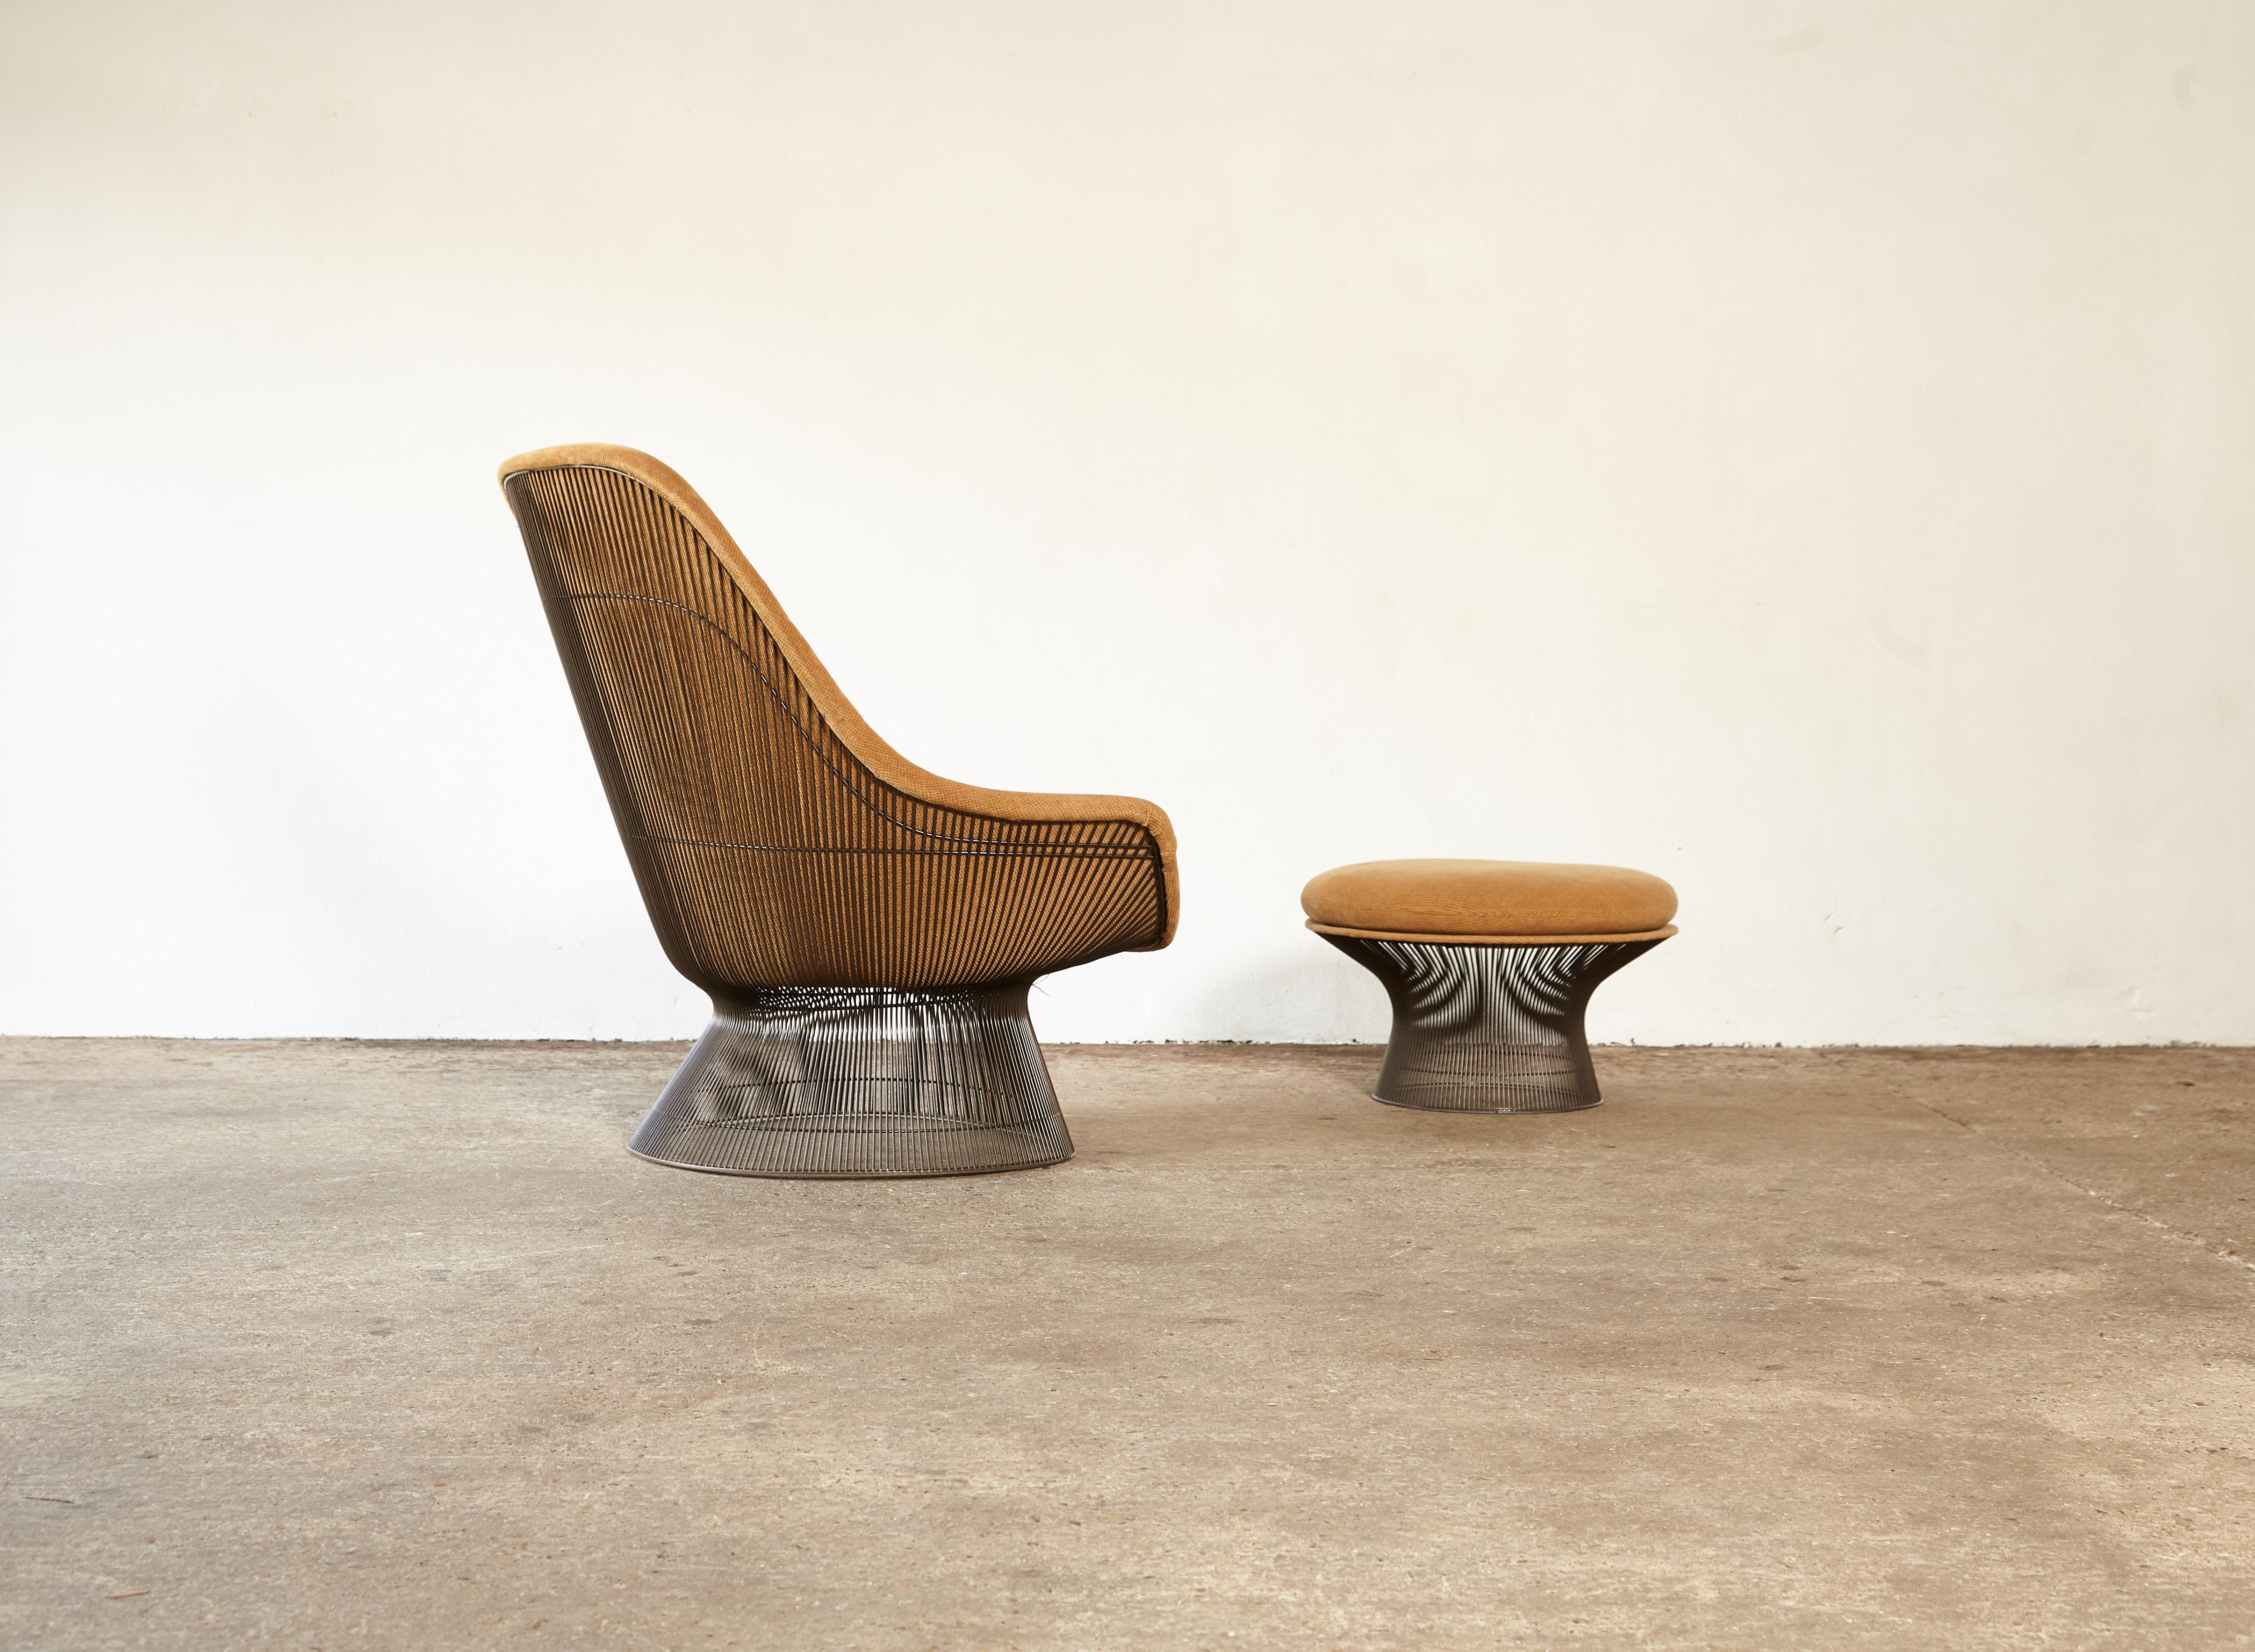 Late 20th Century Warren Platner for Knoll Bronze Lounge Chair and Ottoman, USA, 1960s/70s